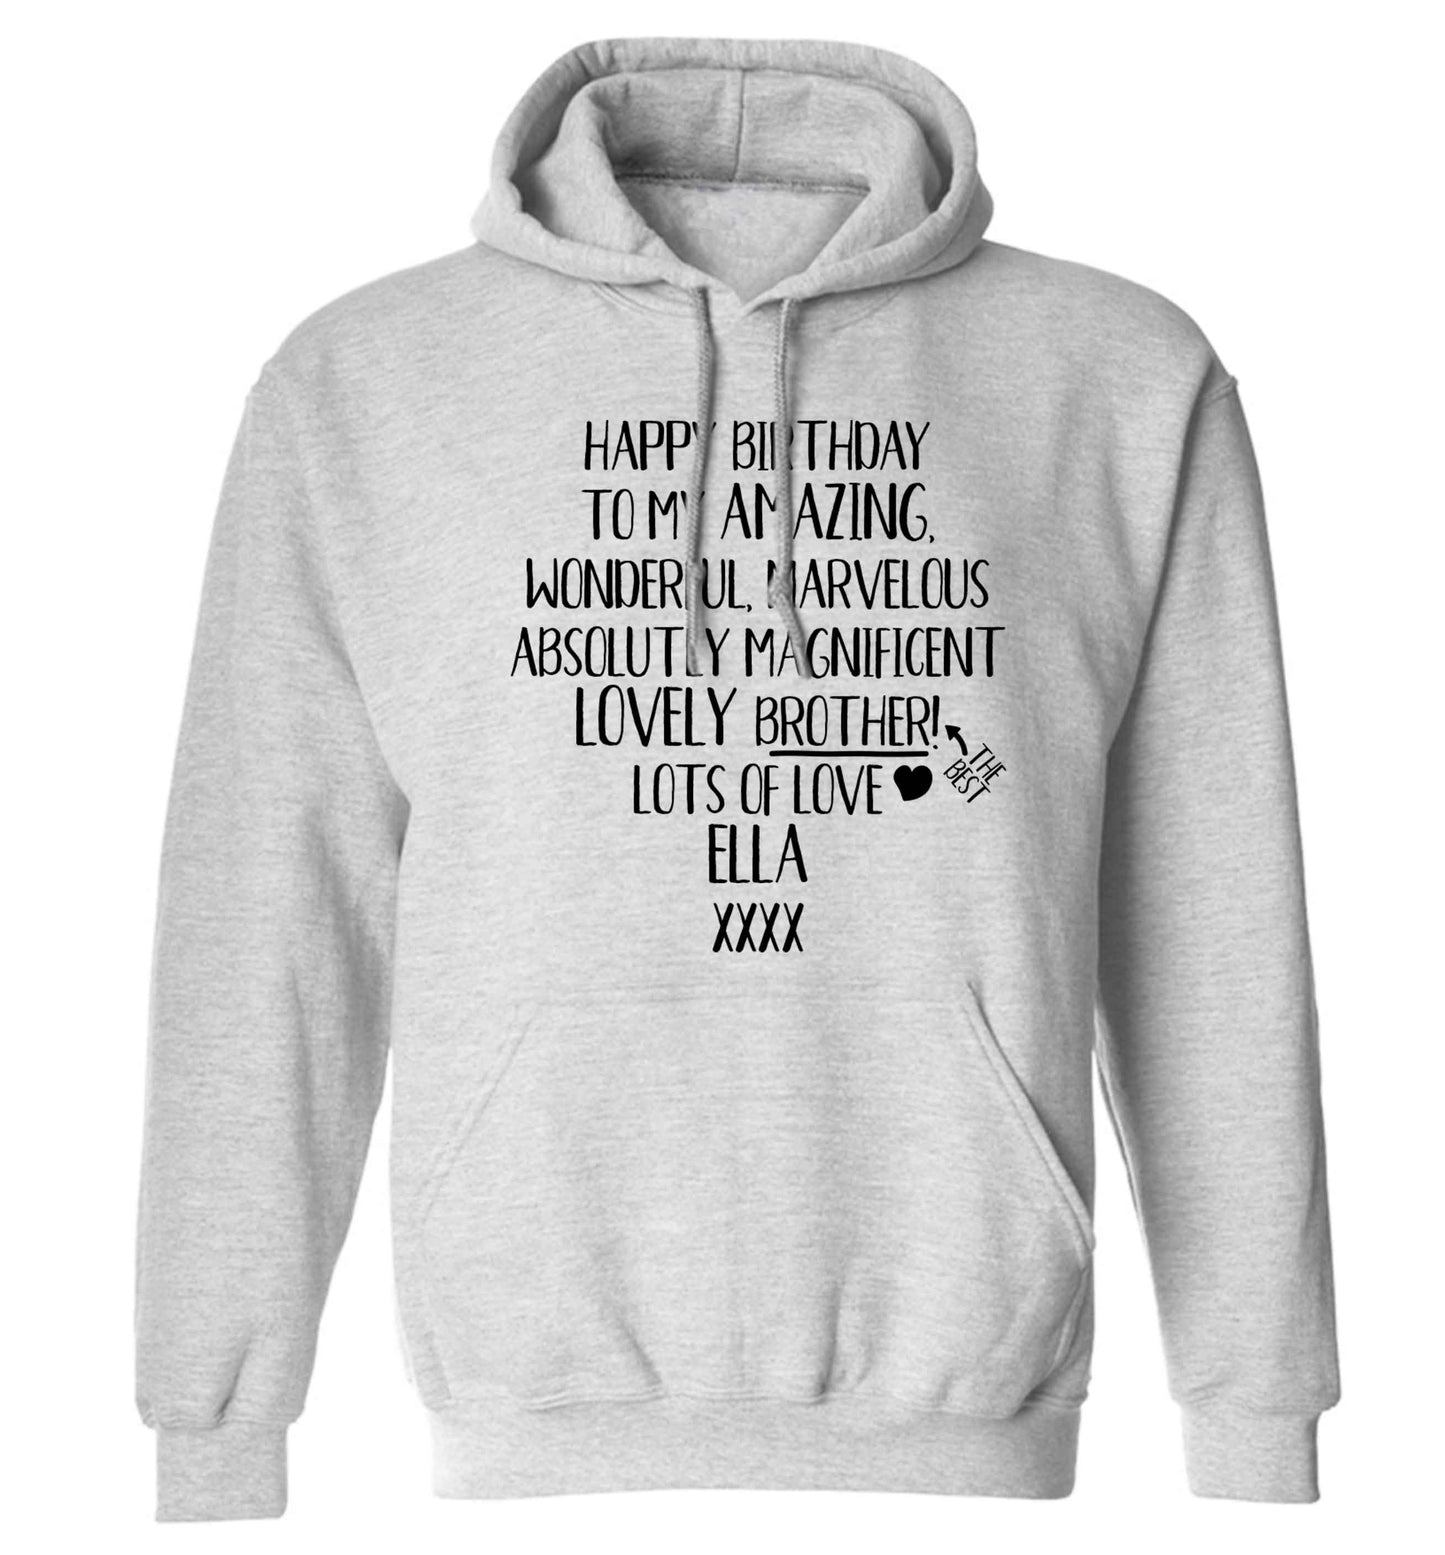 Personalised happy birthday to my amazing, wonderful, lovely brother adults unisex grey hoodie 2XL